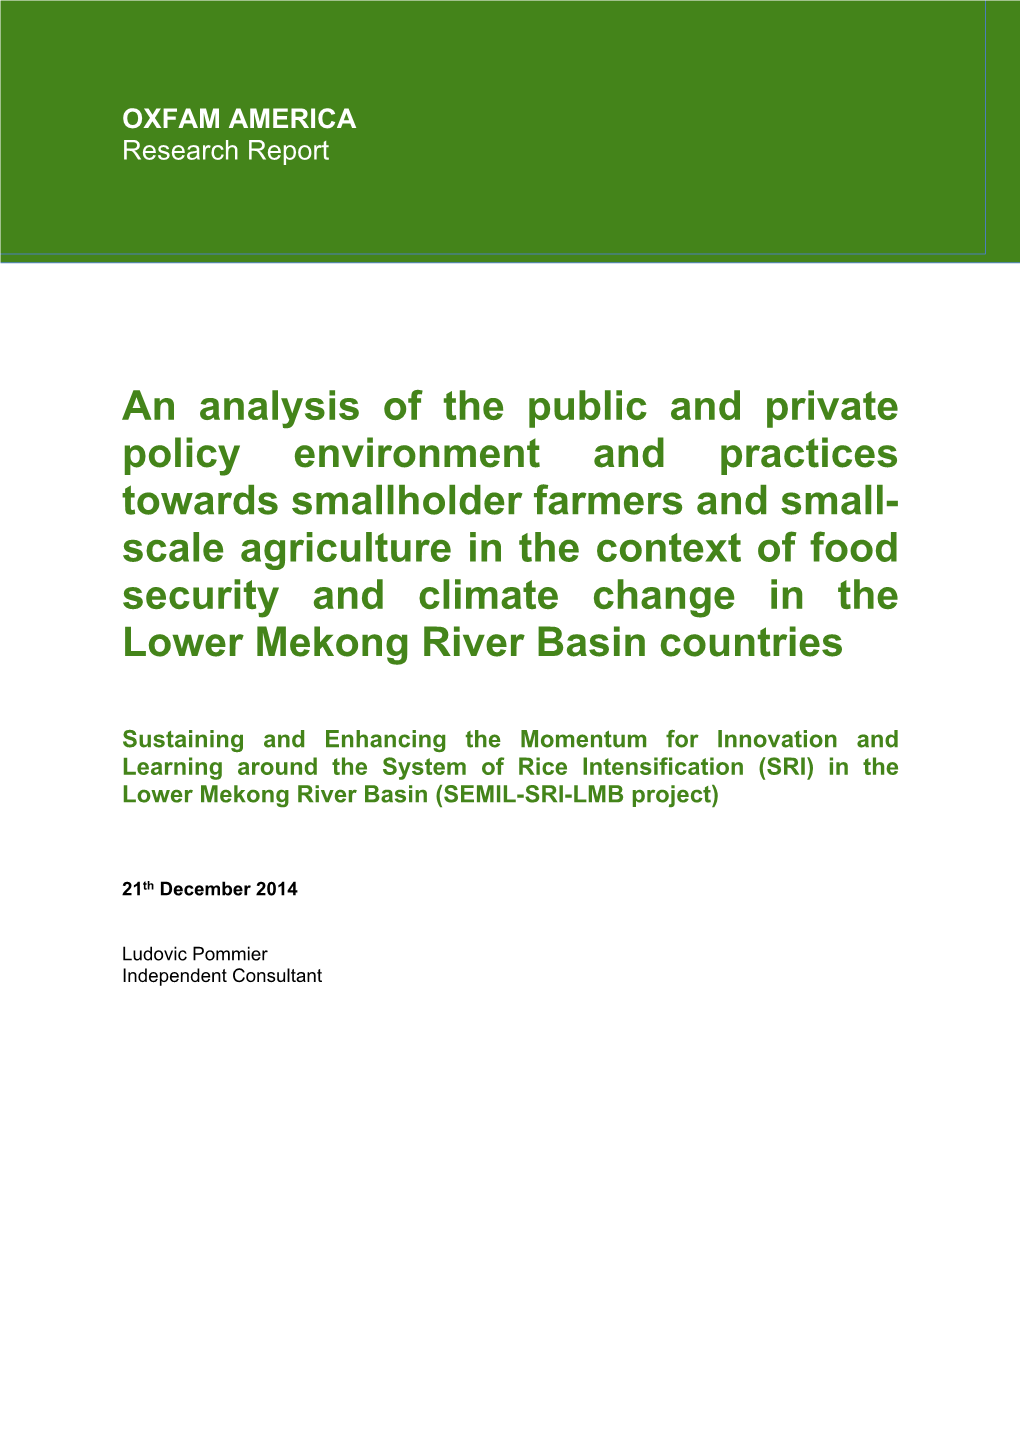 An Analysis of the Public and Private Policy Environment